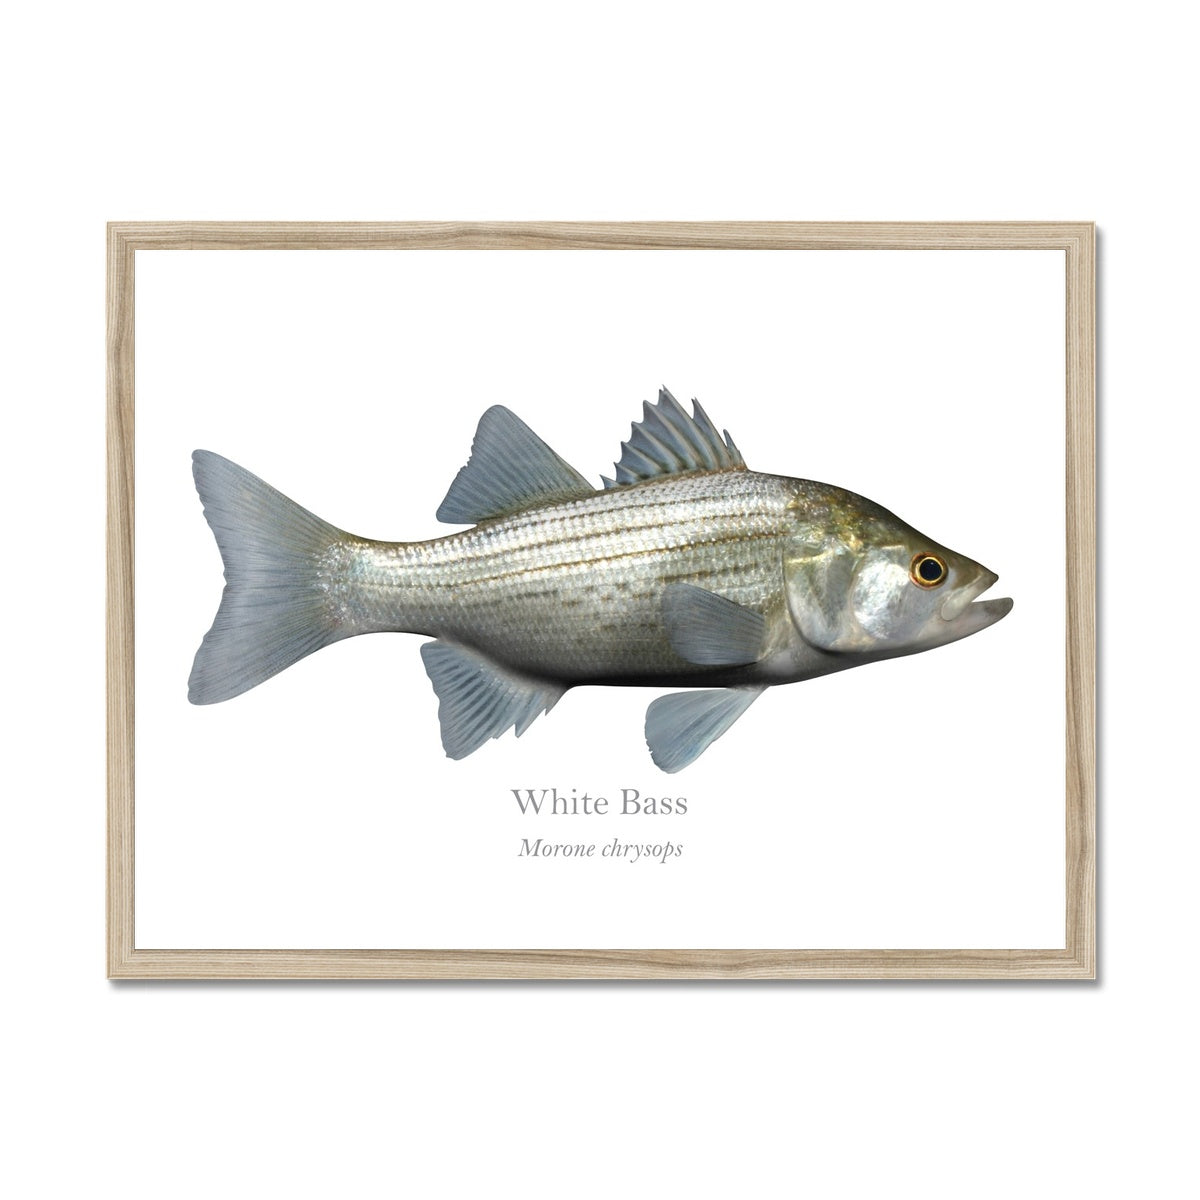 White Bass - Framed Print - With Scientific Name